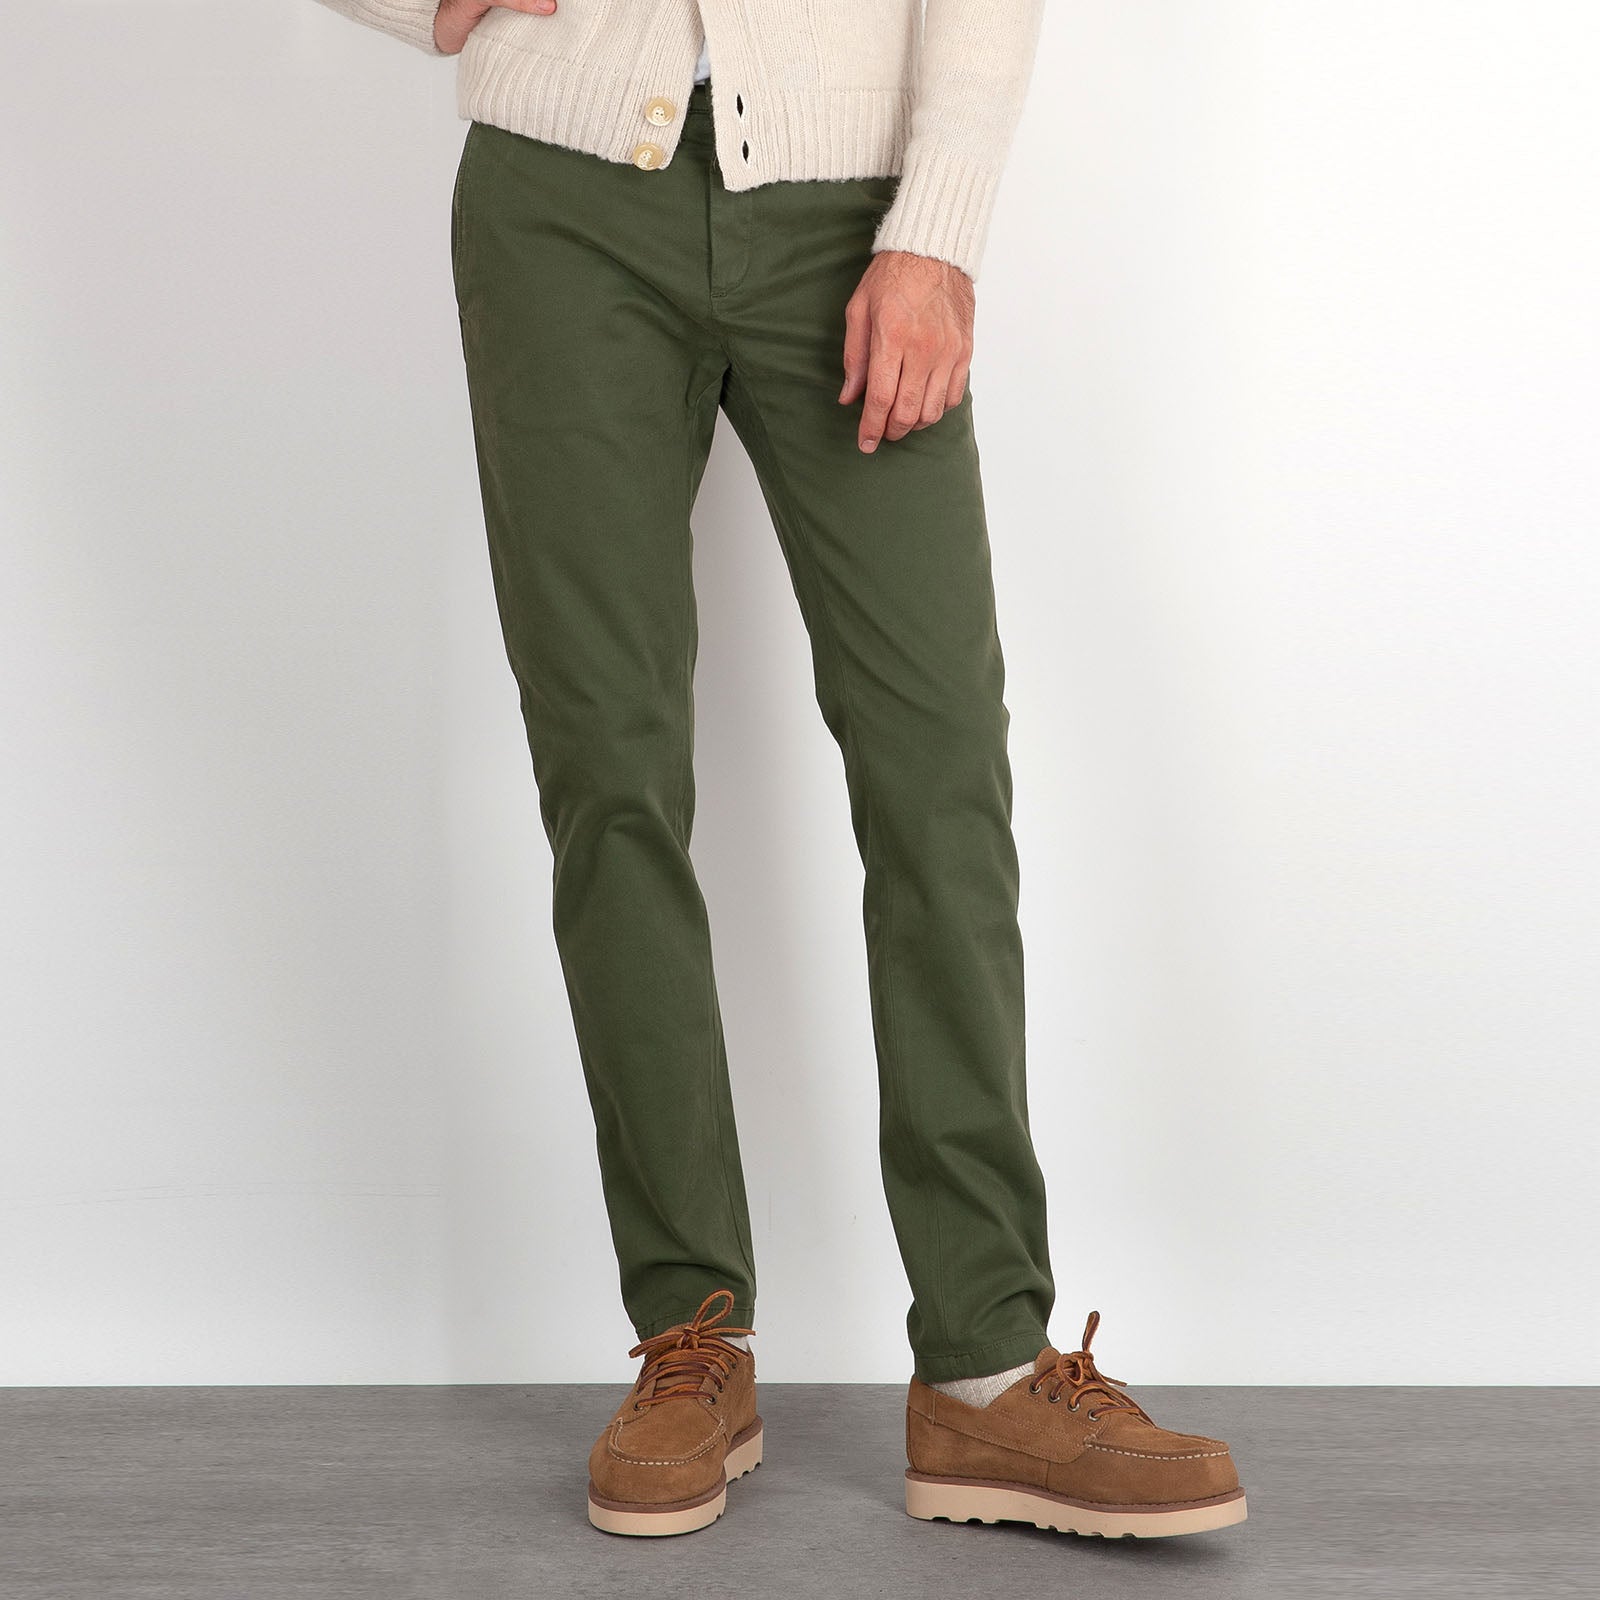 Department Five Mike Green Cotton Trousers - 7